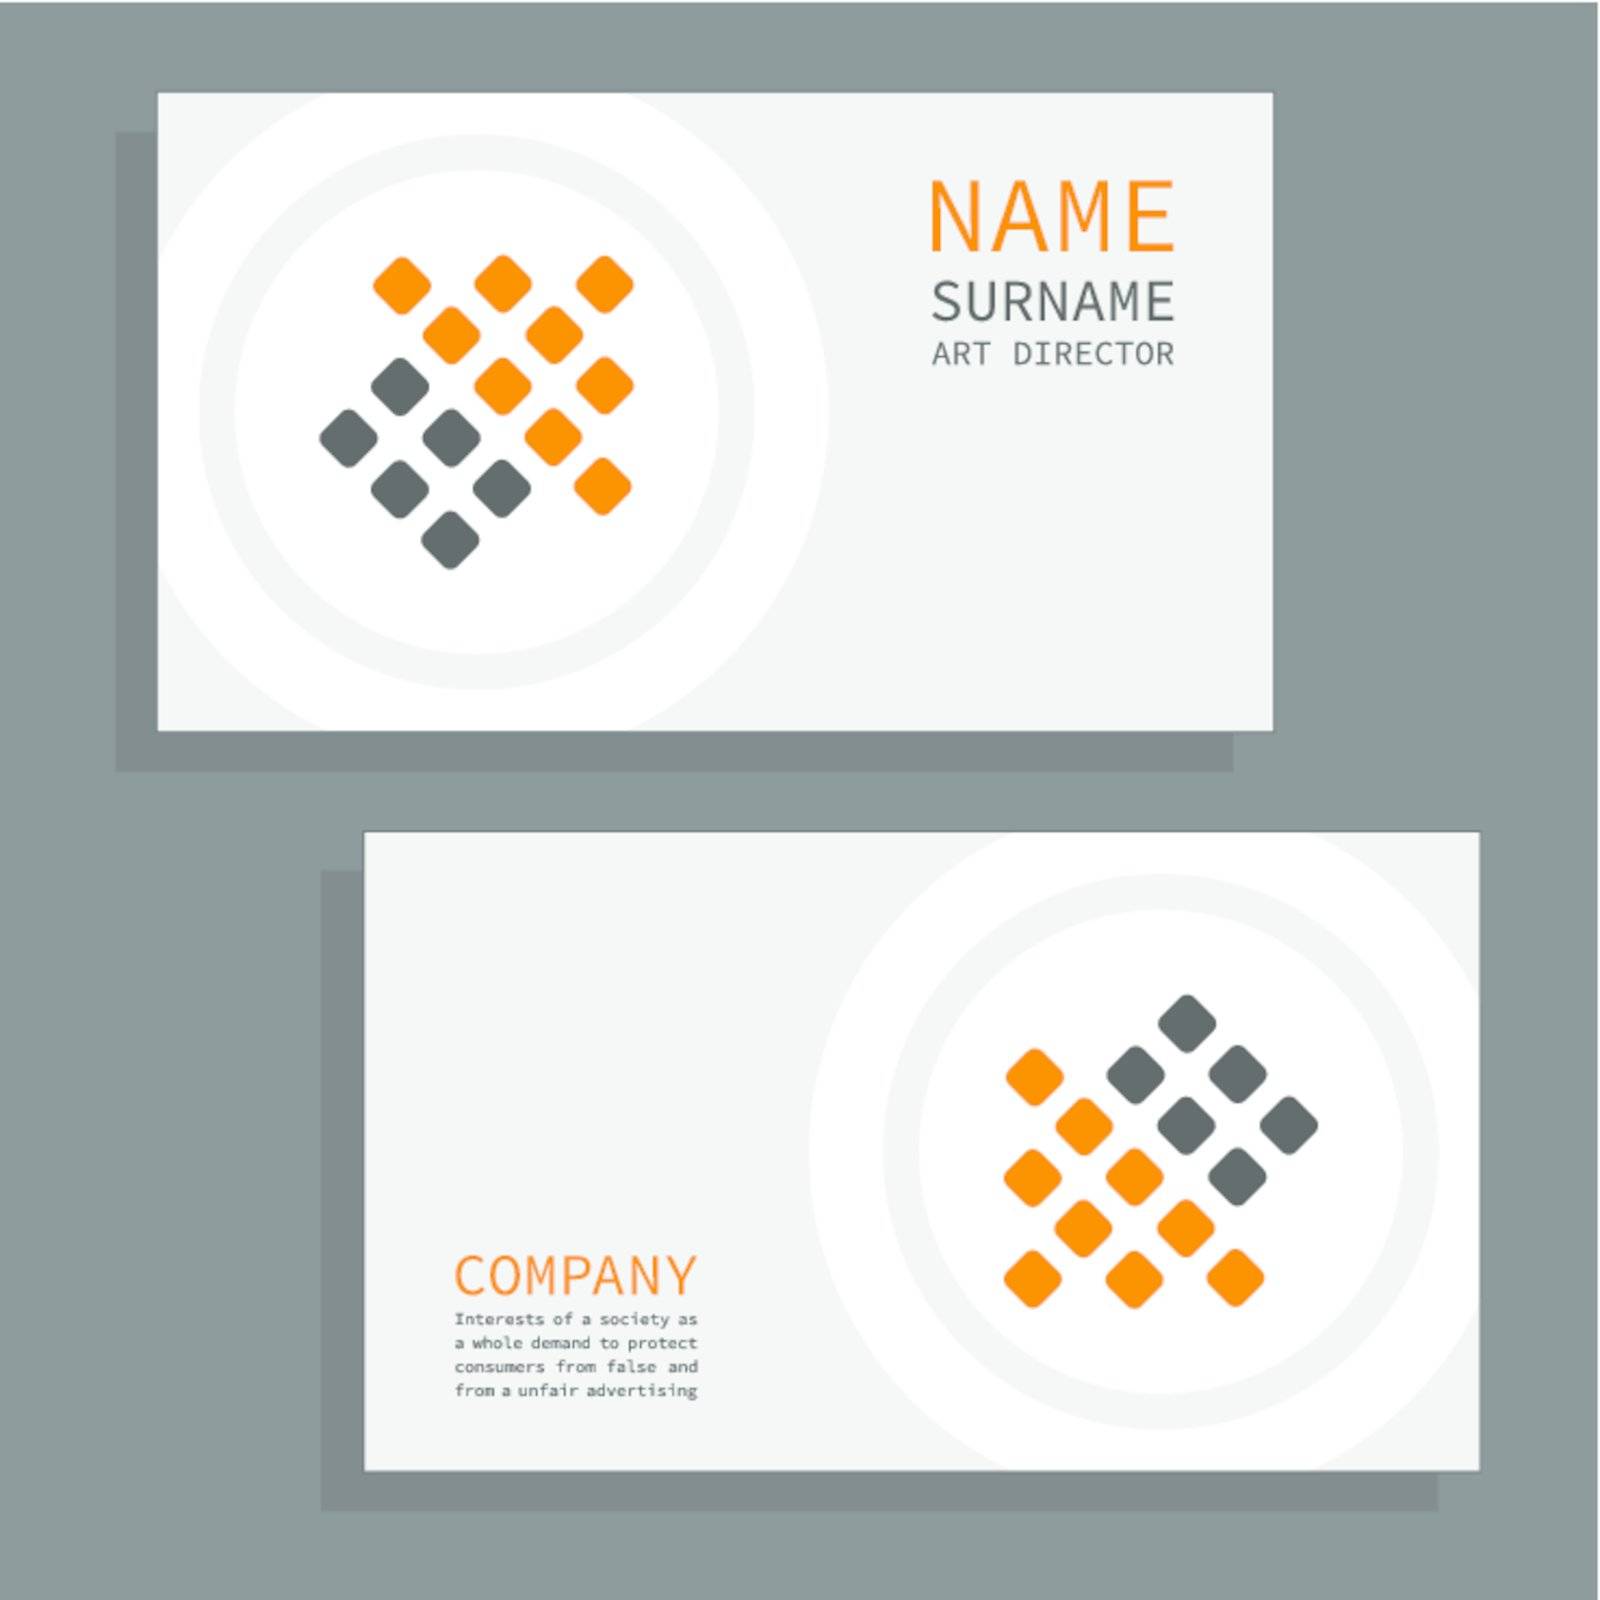 Set of cards for business. A vector illustration